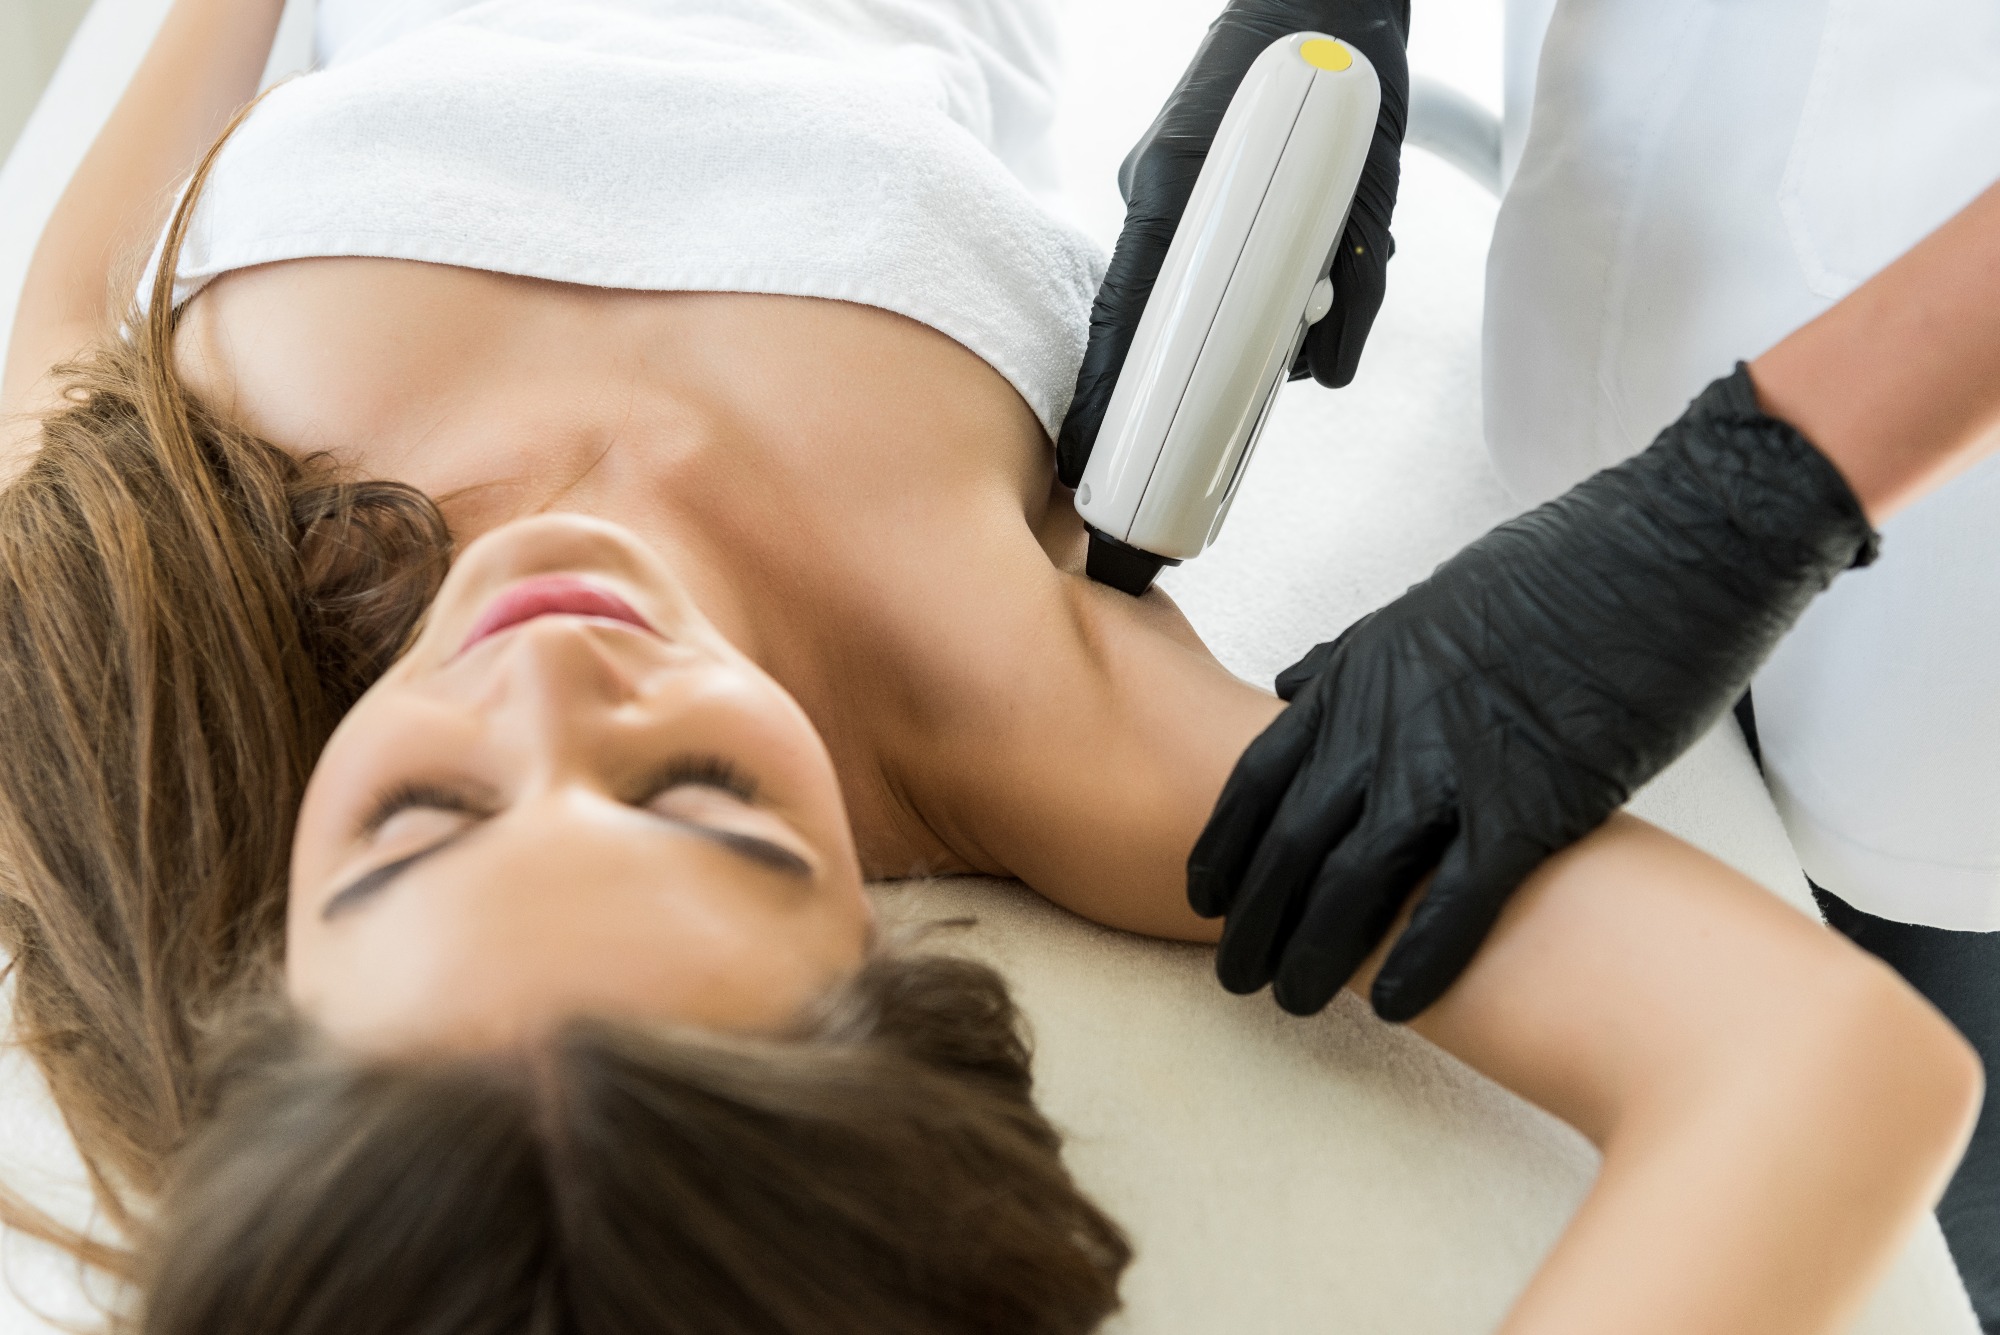 does laser hair removal work permanently?